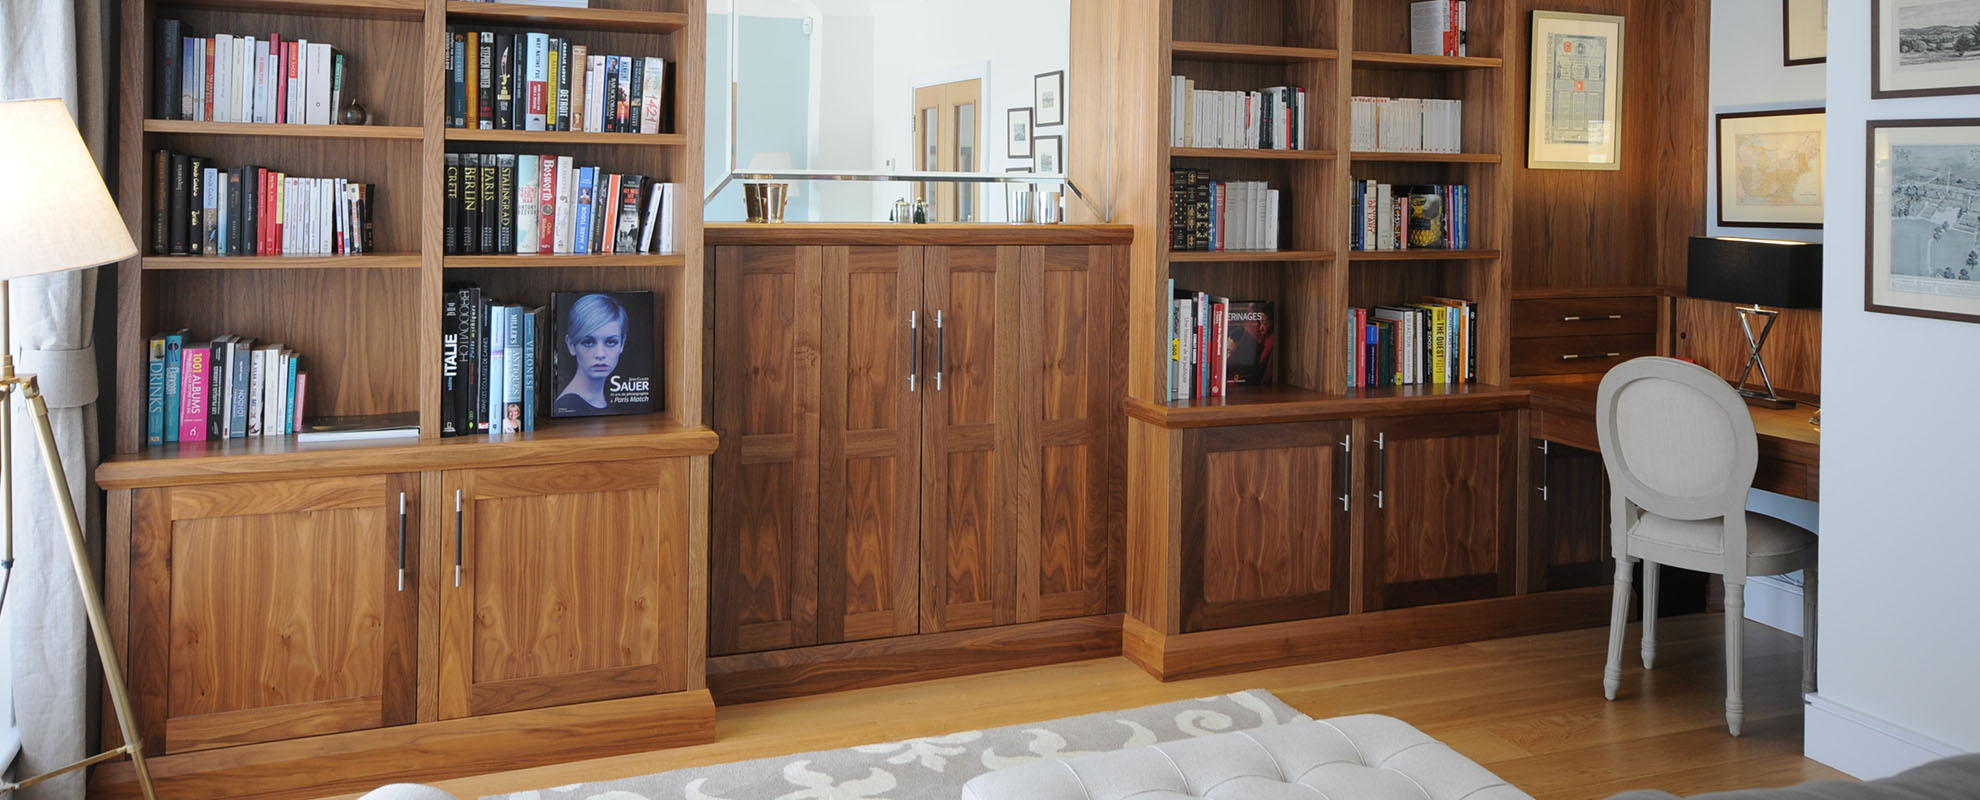 bespoke-fitted-furniture-Sussex